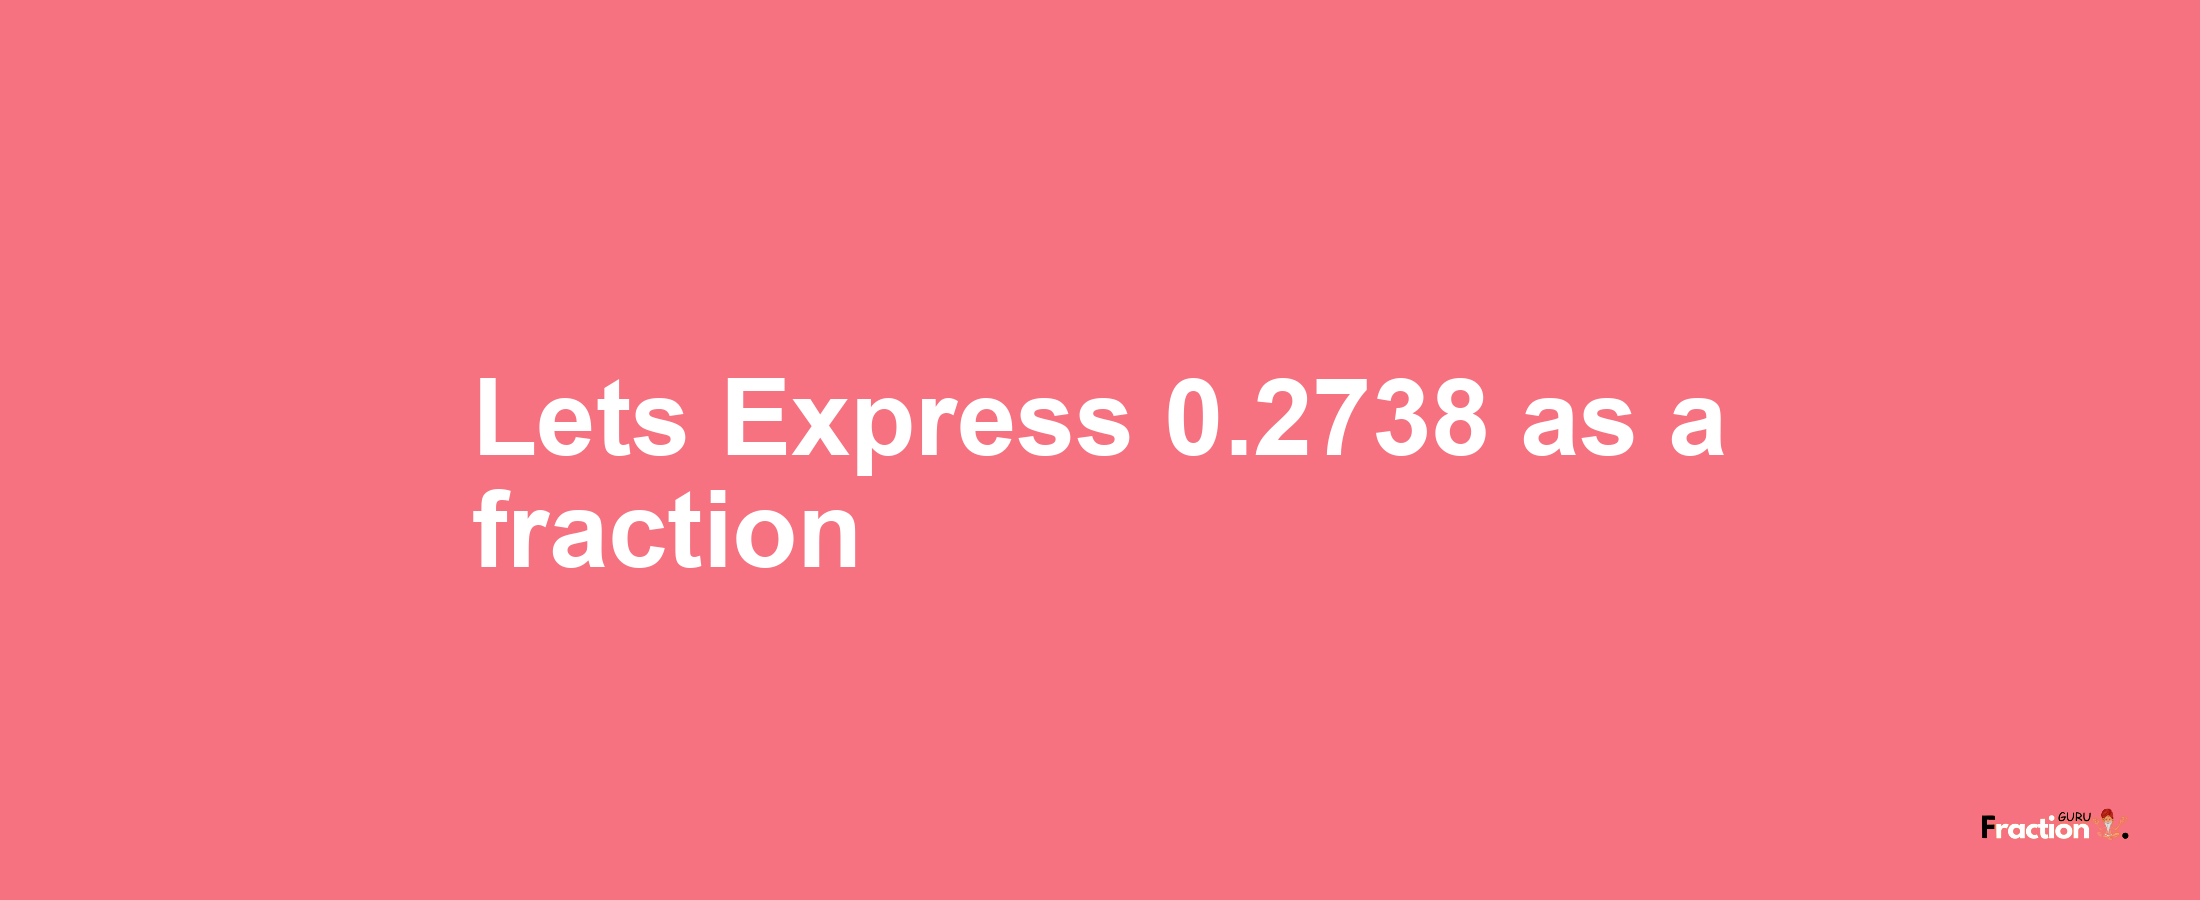 Lets Express 0.2738 as afraction